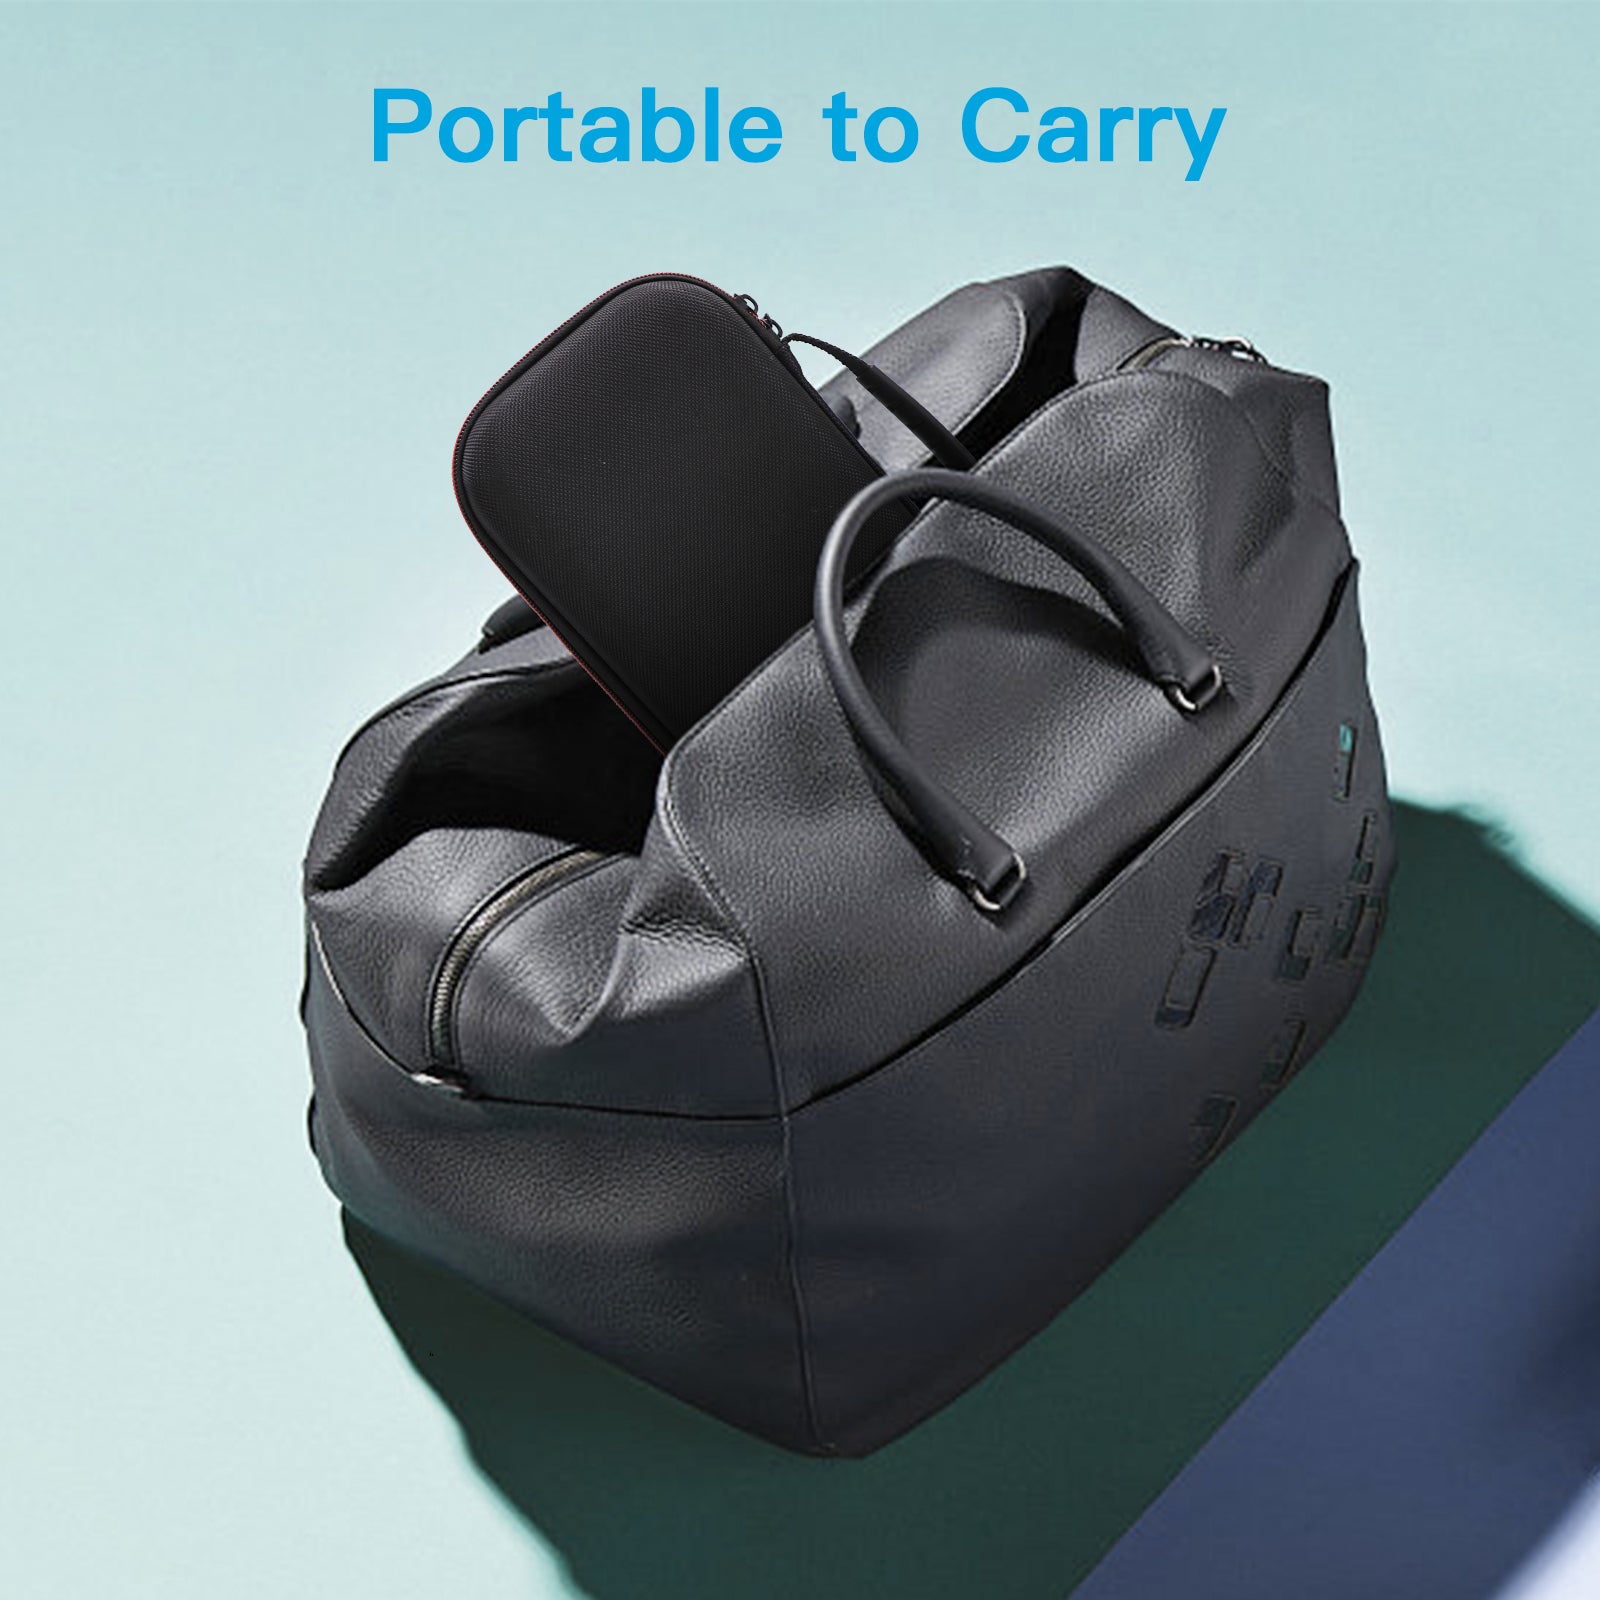 The carry case is placed into a handbag.